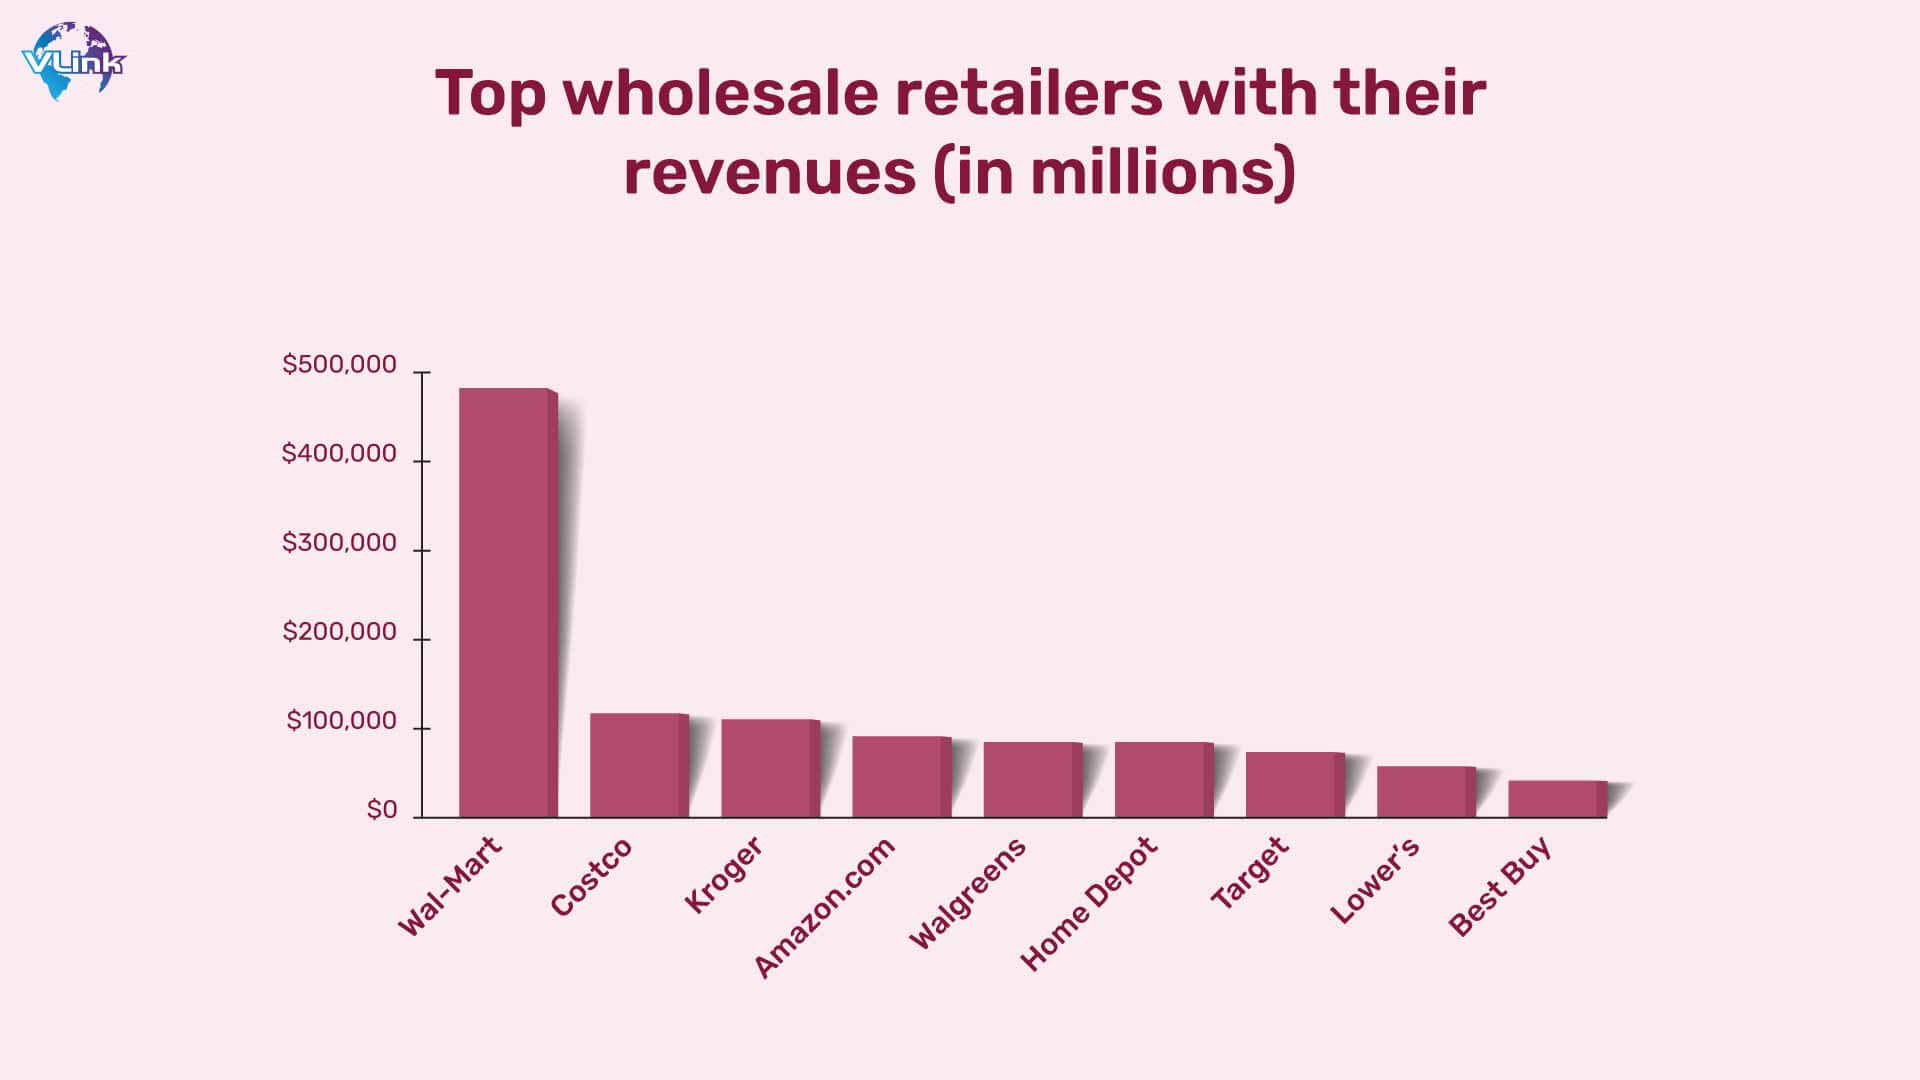 Top wholesale retailers with their revenues (in millions)